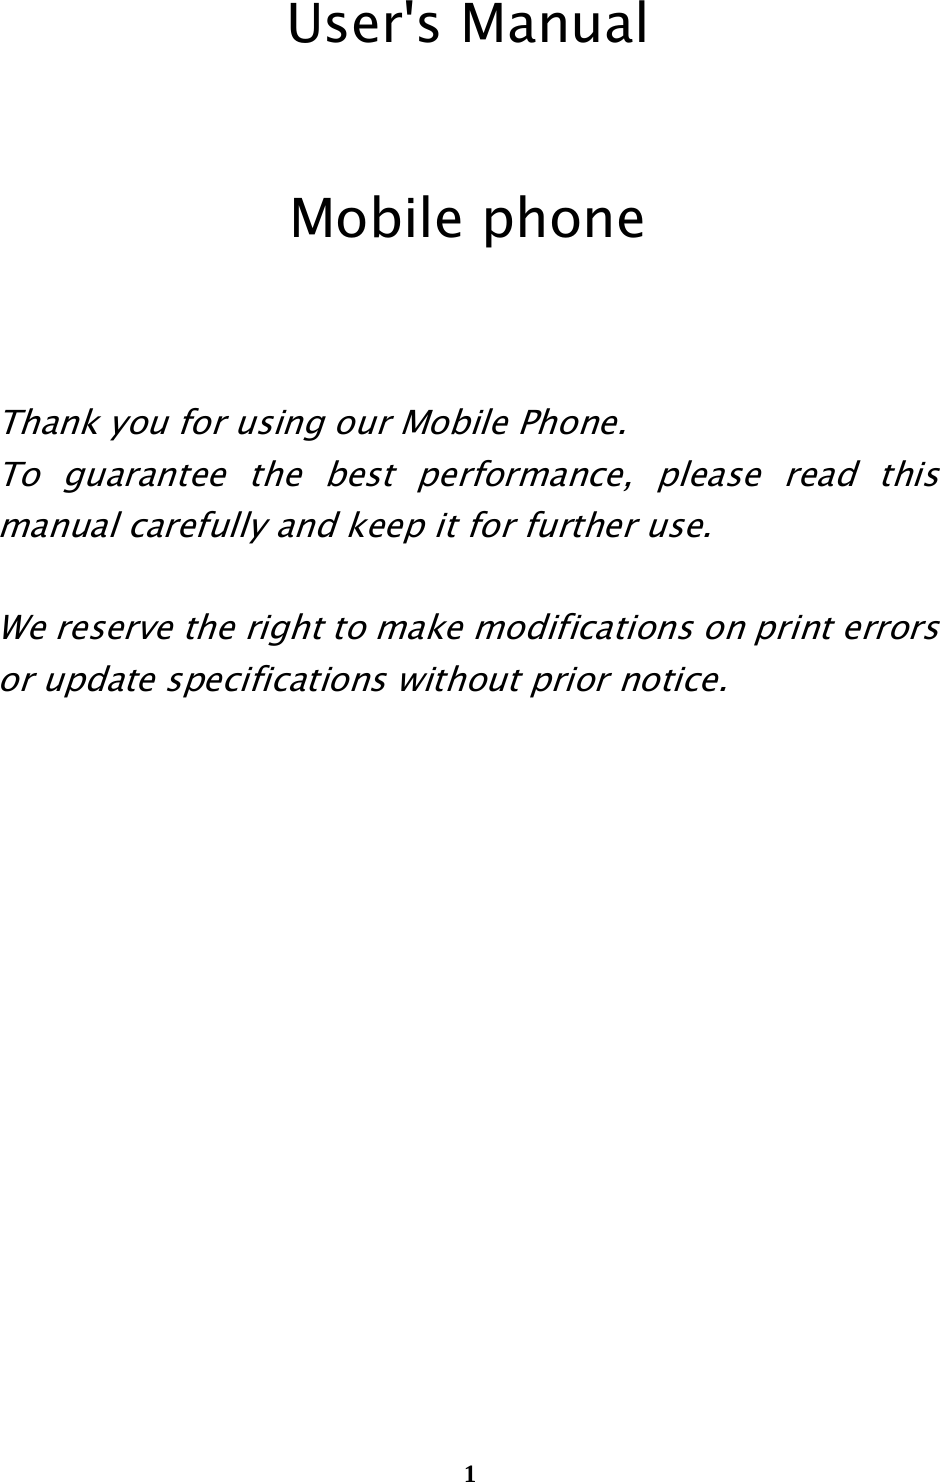  1                                                             User&apos;s Manual  Mobile phone   Thank you for using our Mobile Phone.   To guarantee the best performance, please read this manual carefully and keep it for further use.  We reserve the right to make modifications on print errors or update specifications without prior notice.            